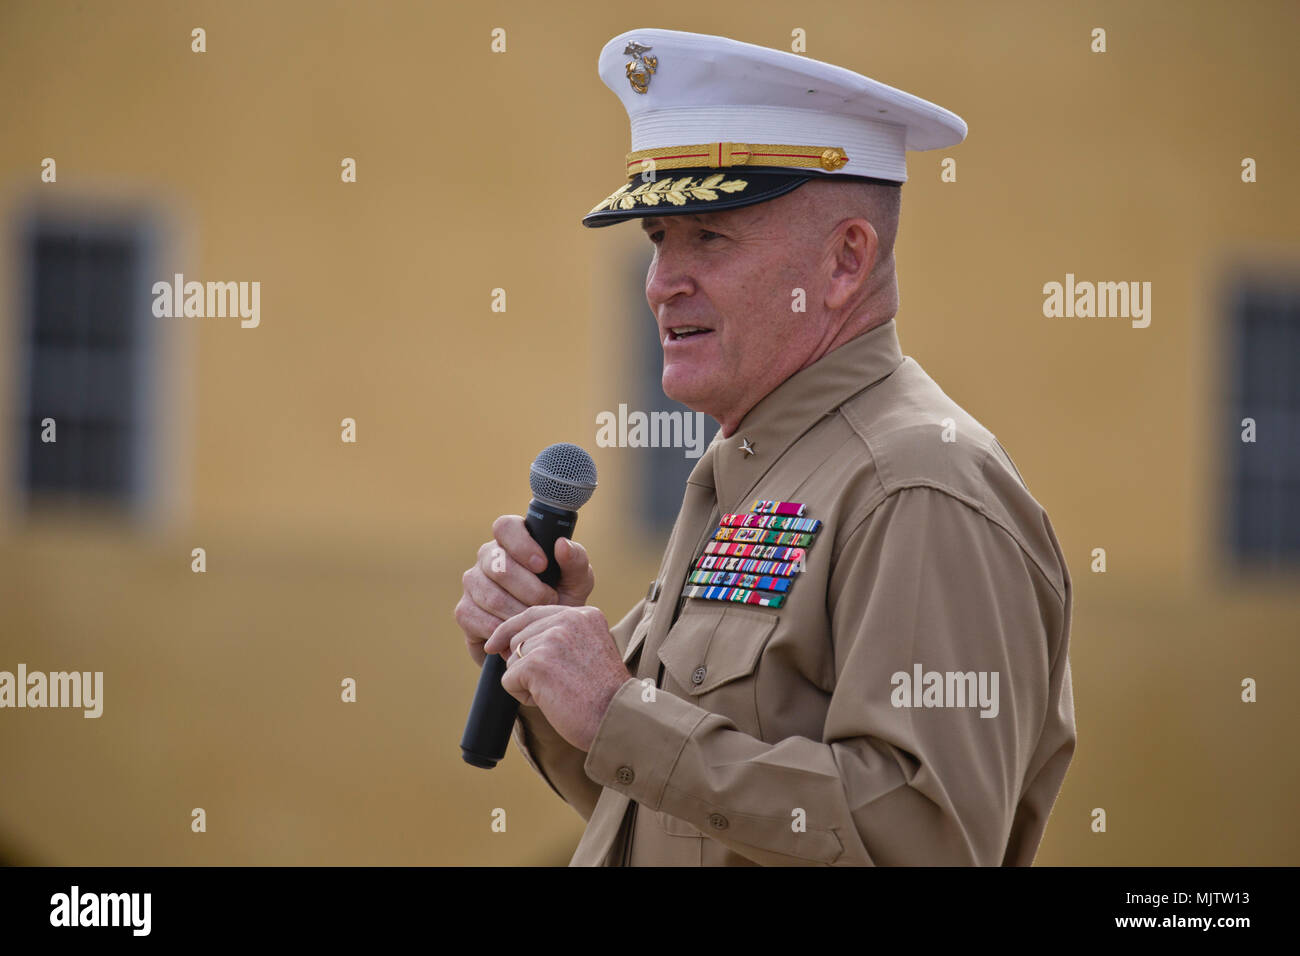 Brigadier Gen. William M. Jurney, commanding general, Marine Corps Recruit Depot San Diego/ Western Recruiting Region, addresses an audience during a concert at MCRD San Diego, Dec. 9. Marine Band San Diego hosted the annual winter concert to celebrate the holiday season. Stock Photo